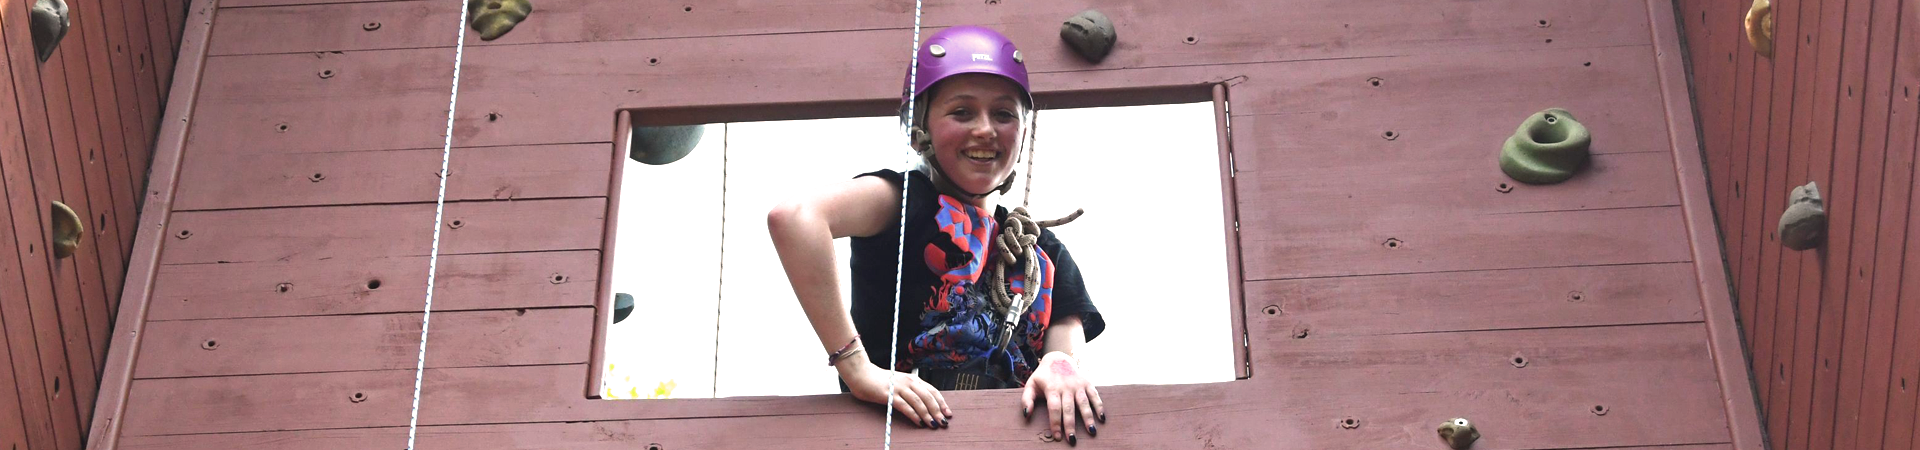  girl smiling on climbing rock wall with helmet on 